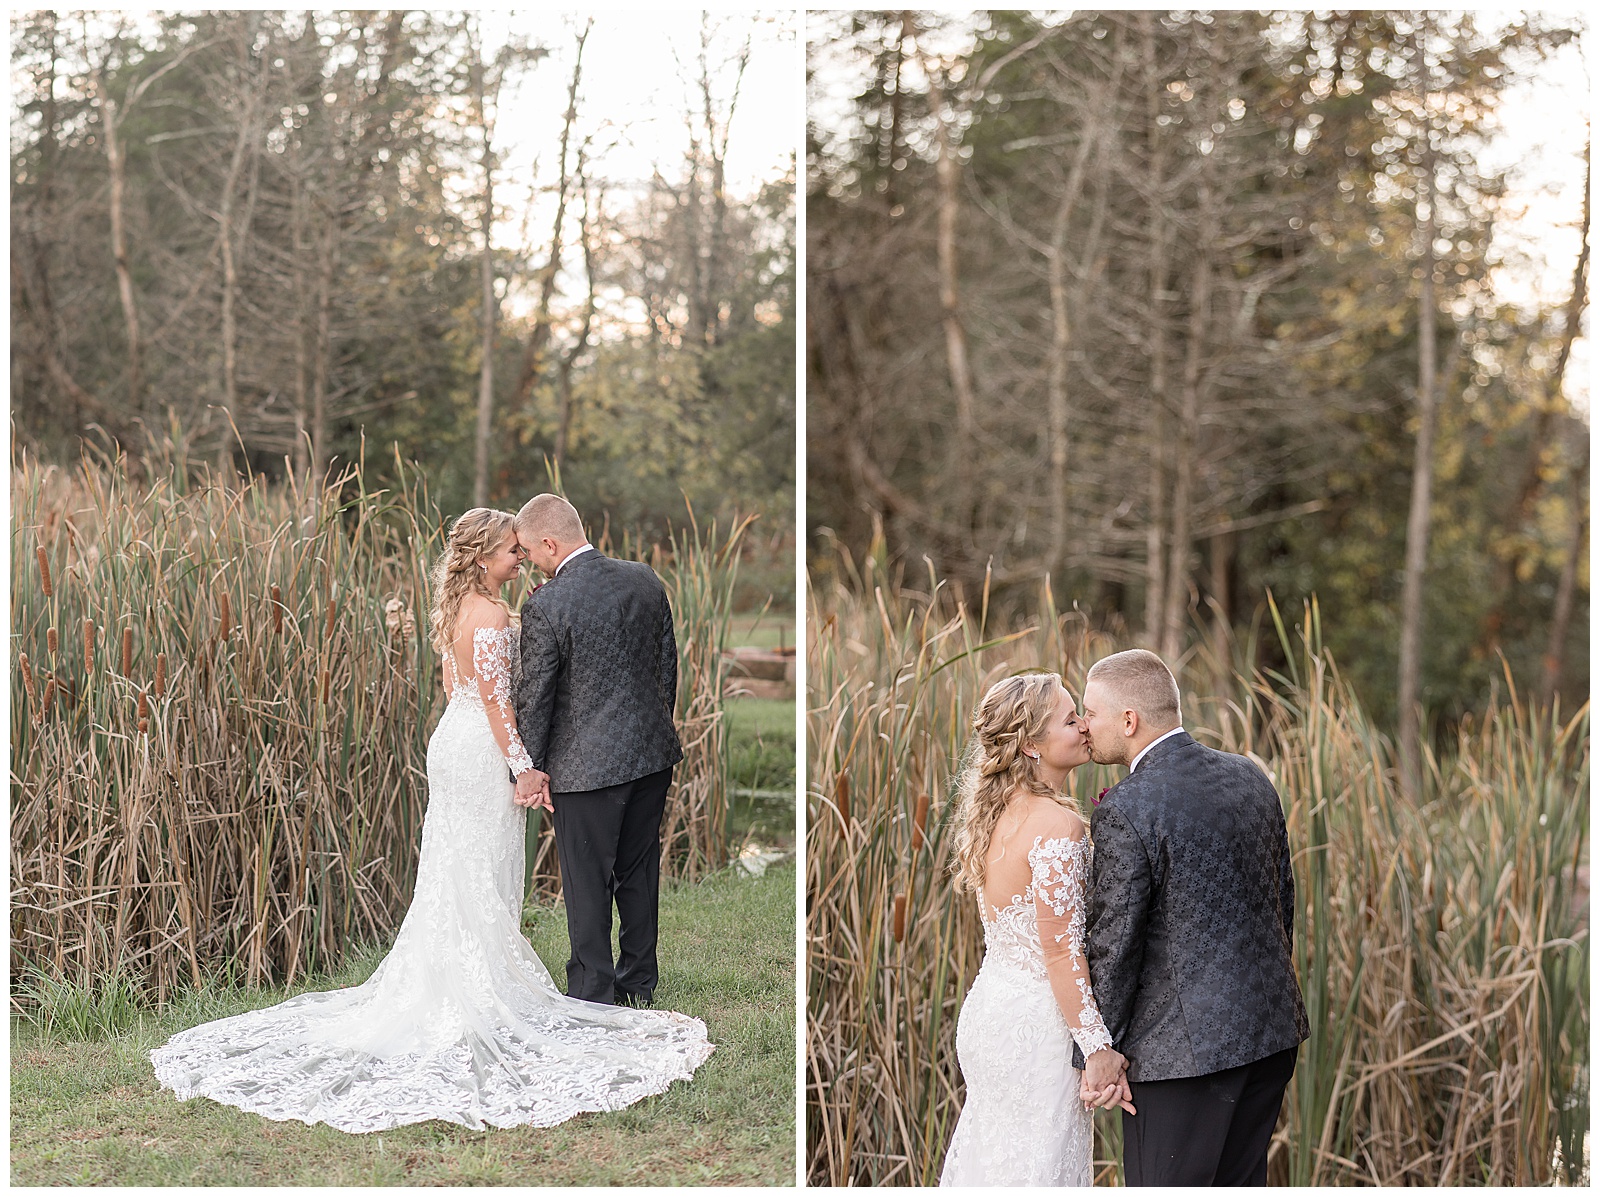 backs of bride and groom toward camera as they kiss by corn field on fall day in pennsylvania